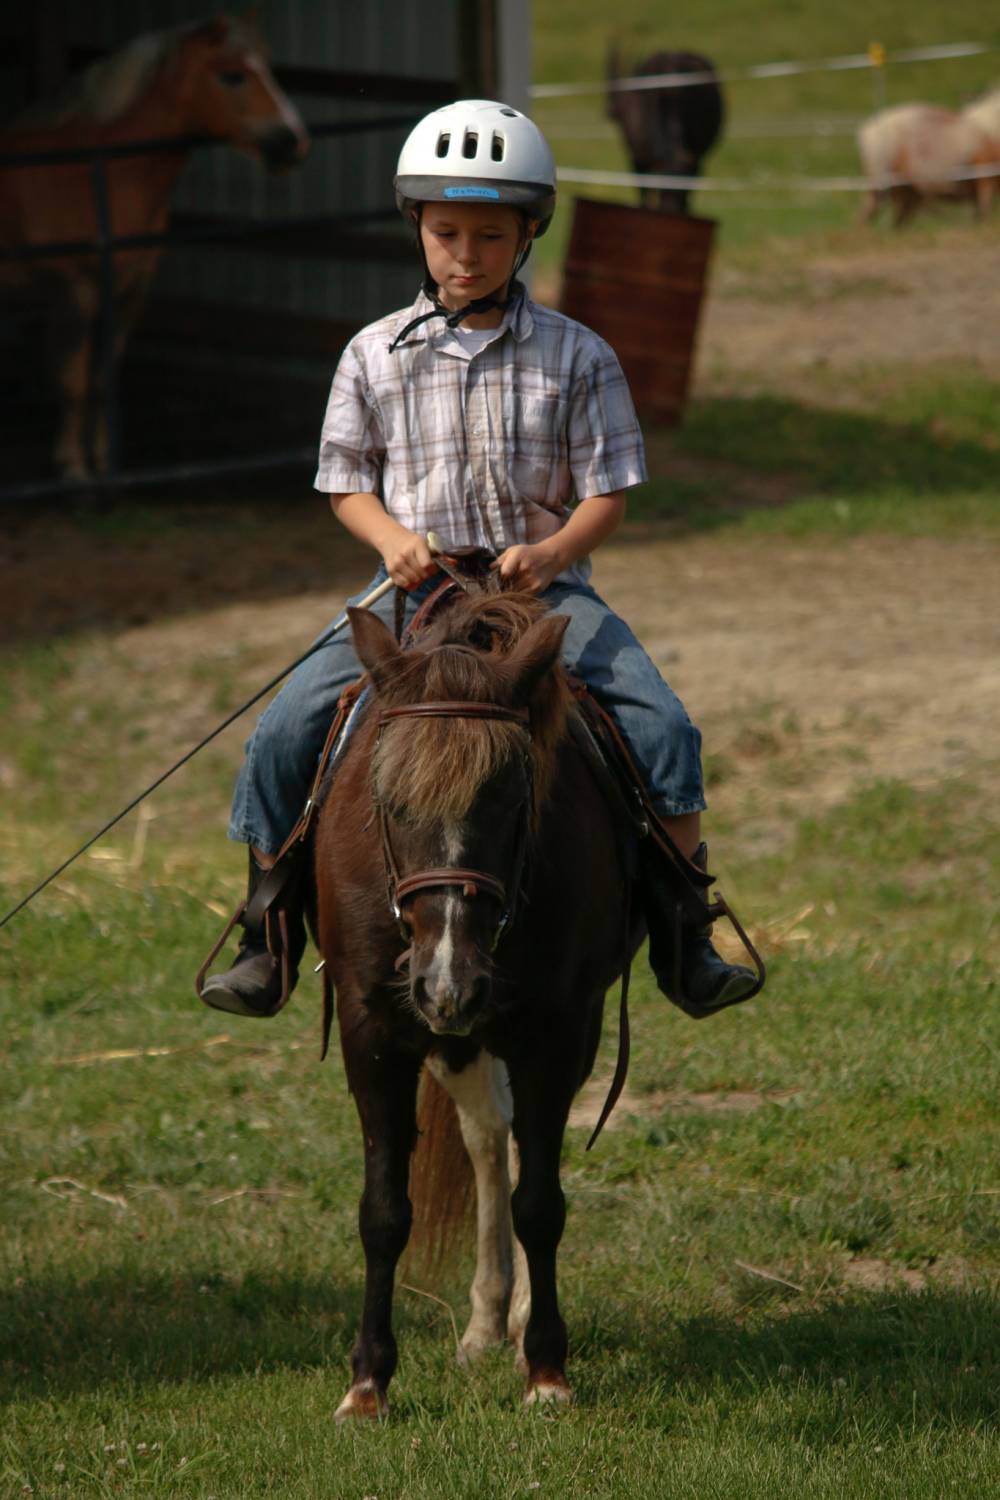 TOP PENNSYLVANIA SLEEPAWAY CAMP: Fairview Farm and Guest Ranch - Rough Riders Girl s Camp is a Top Sleepaway Summer Camp located in Granville Summit Pennsylvania offering many fun and enriching Sleepaway and other camp programs. 